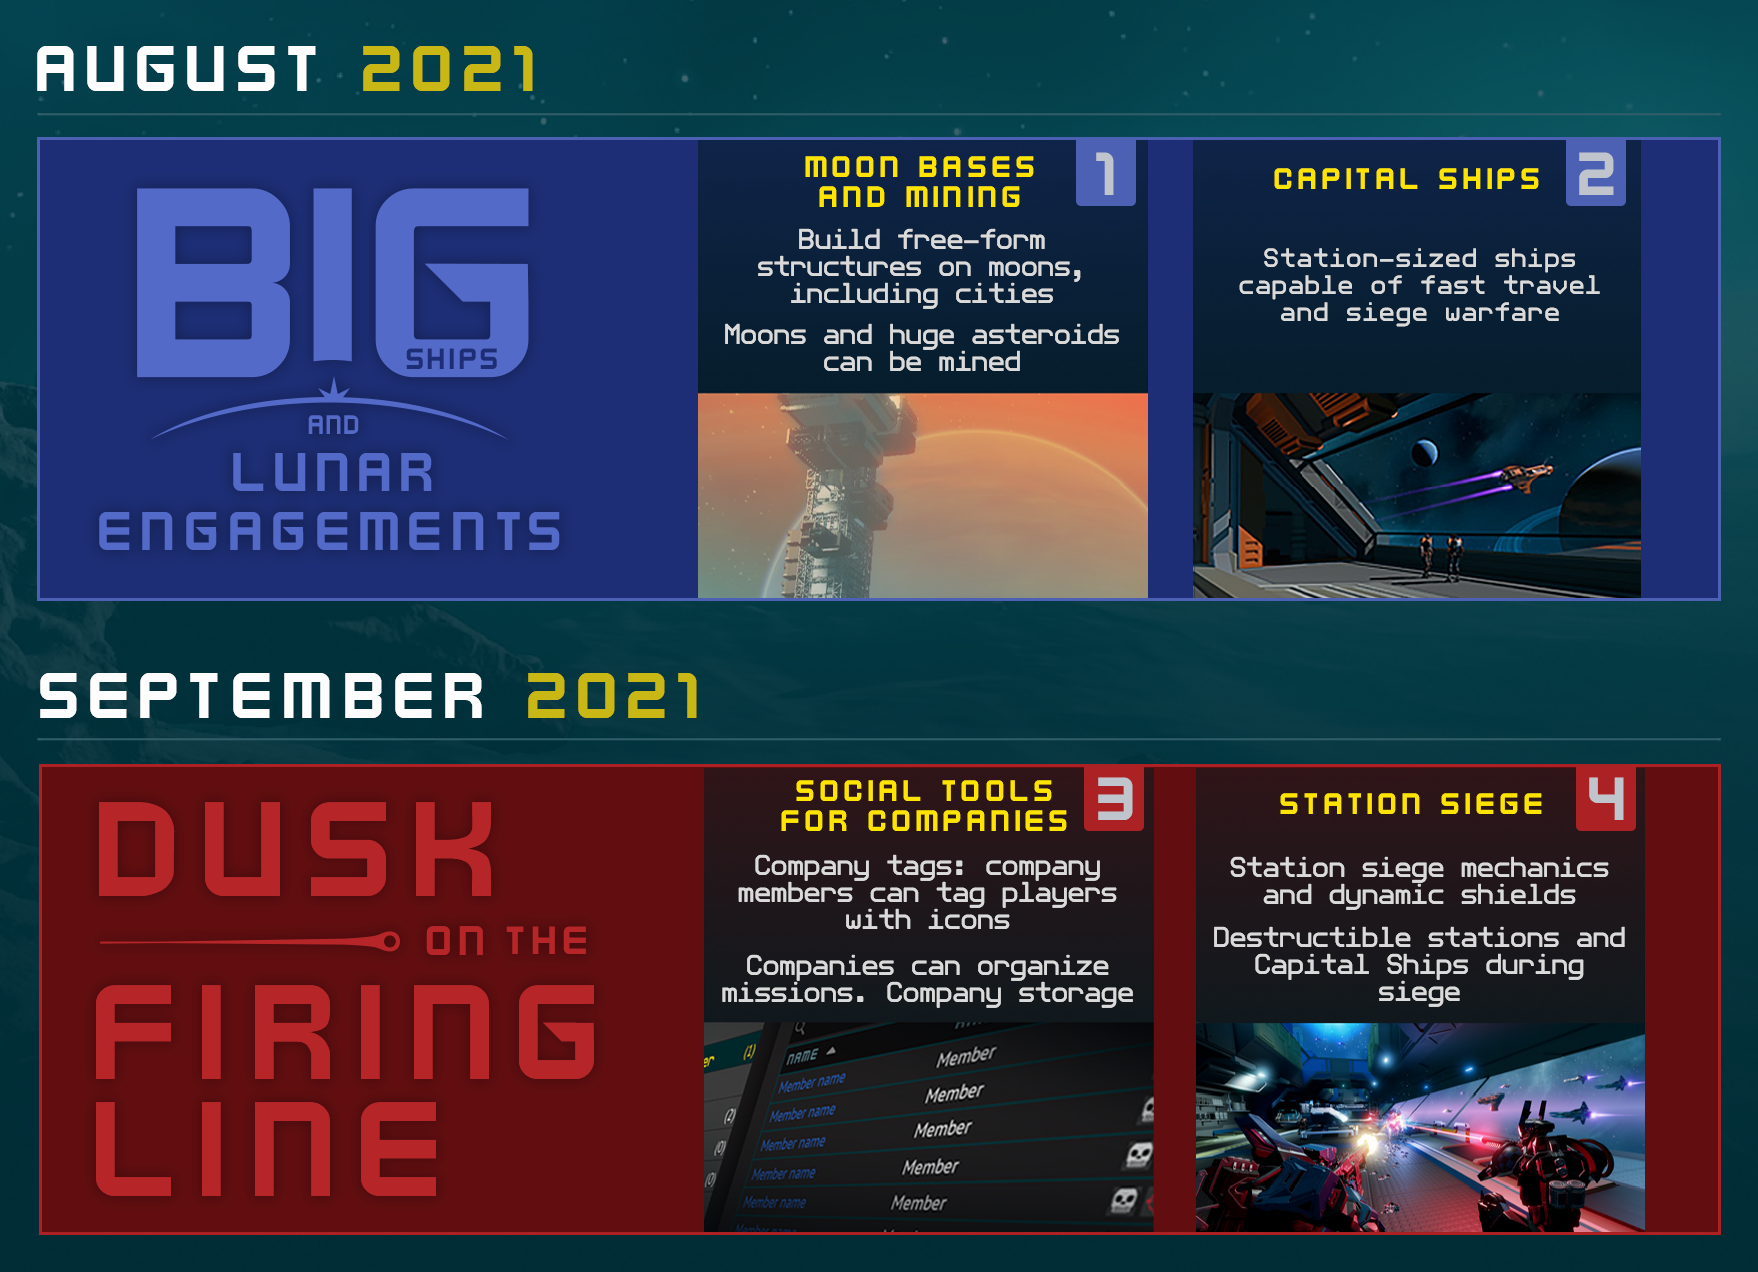 starbase_monthly_updates_tileswithbg_year_22.7.2021.png